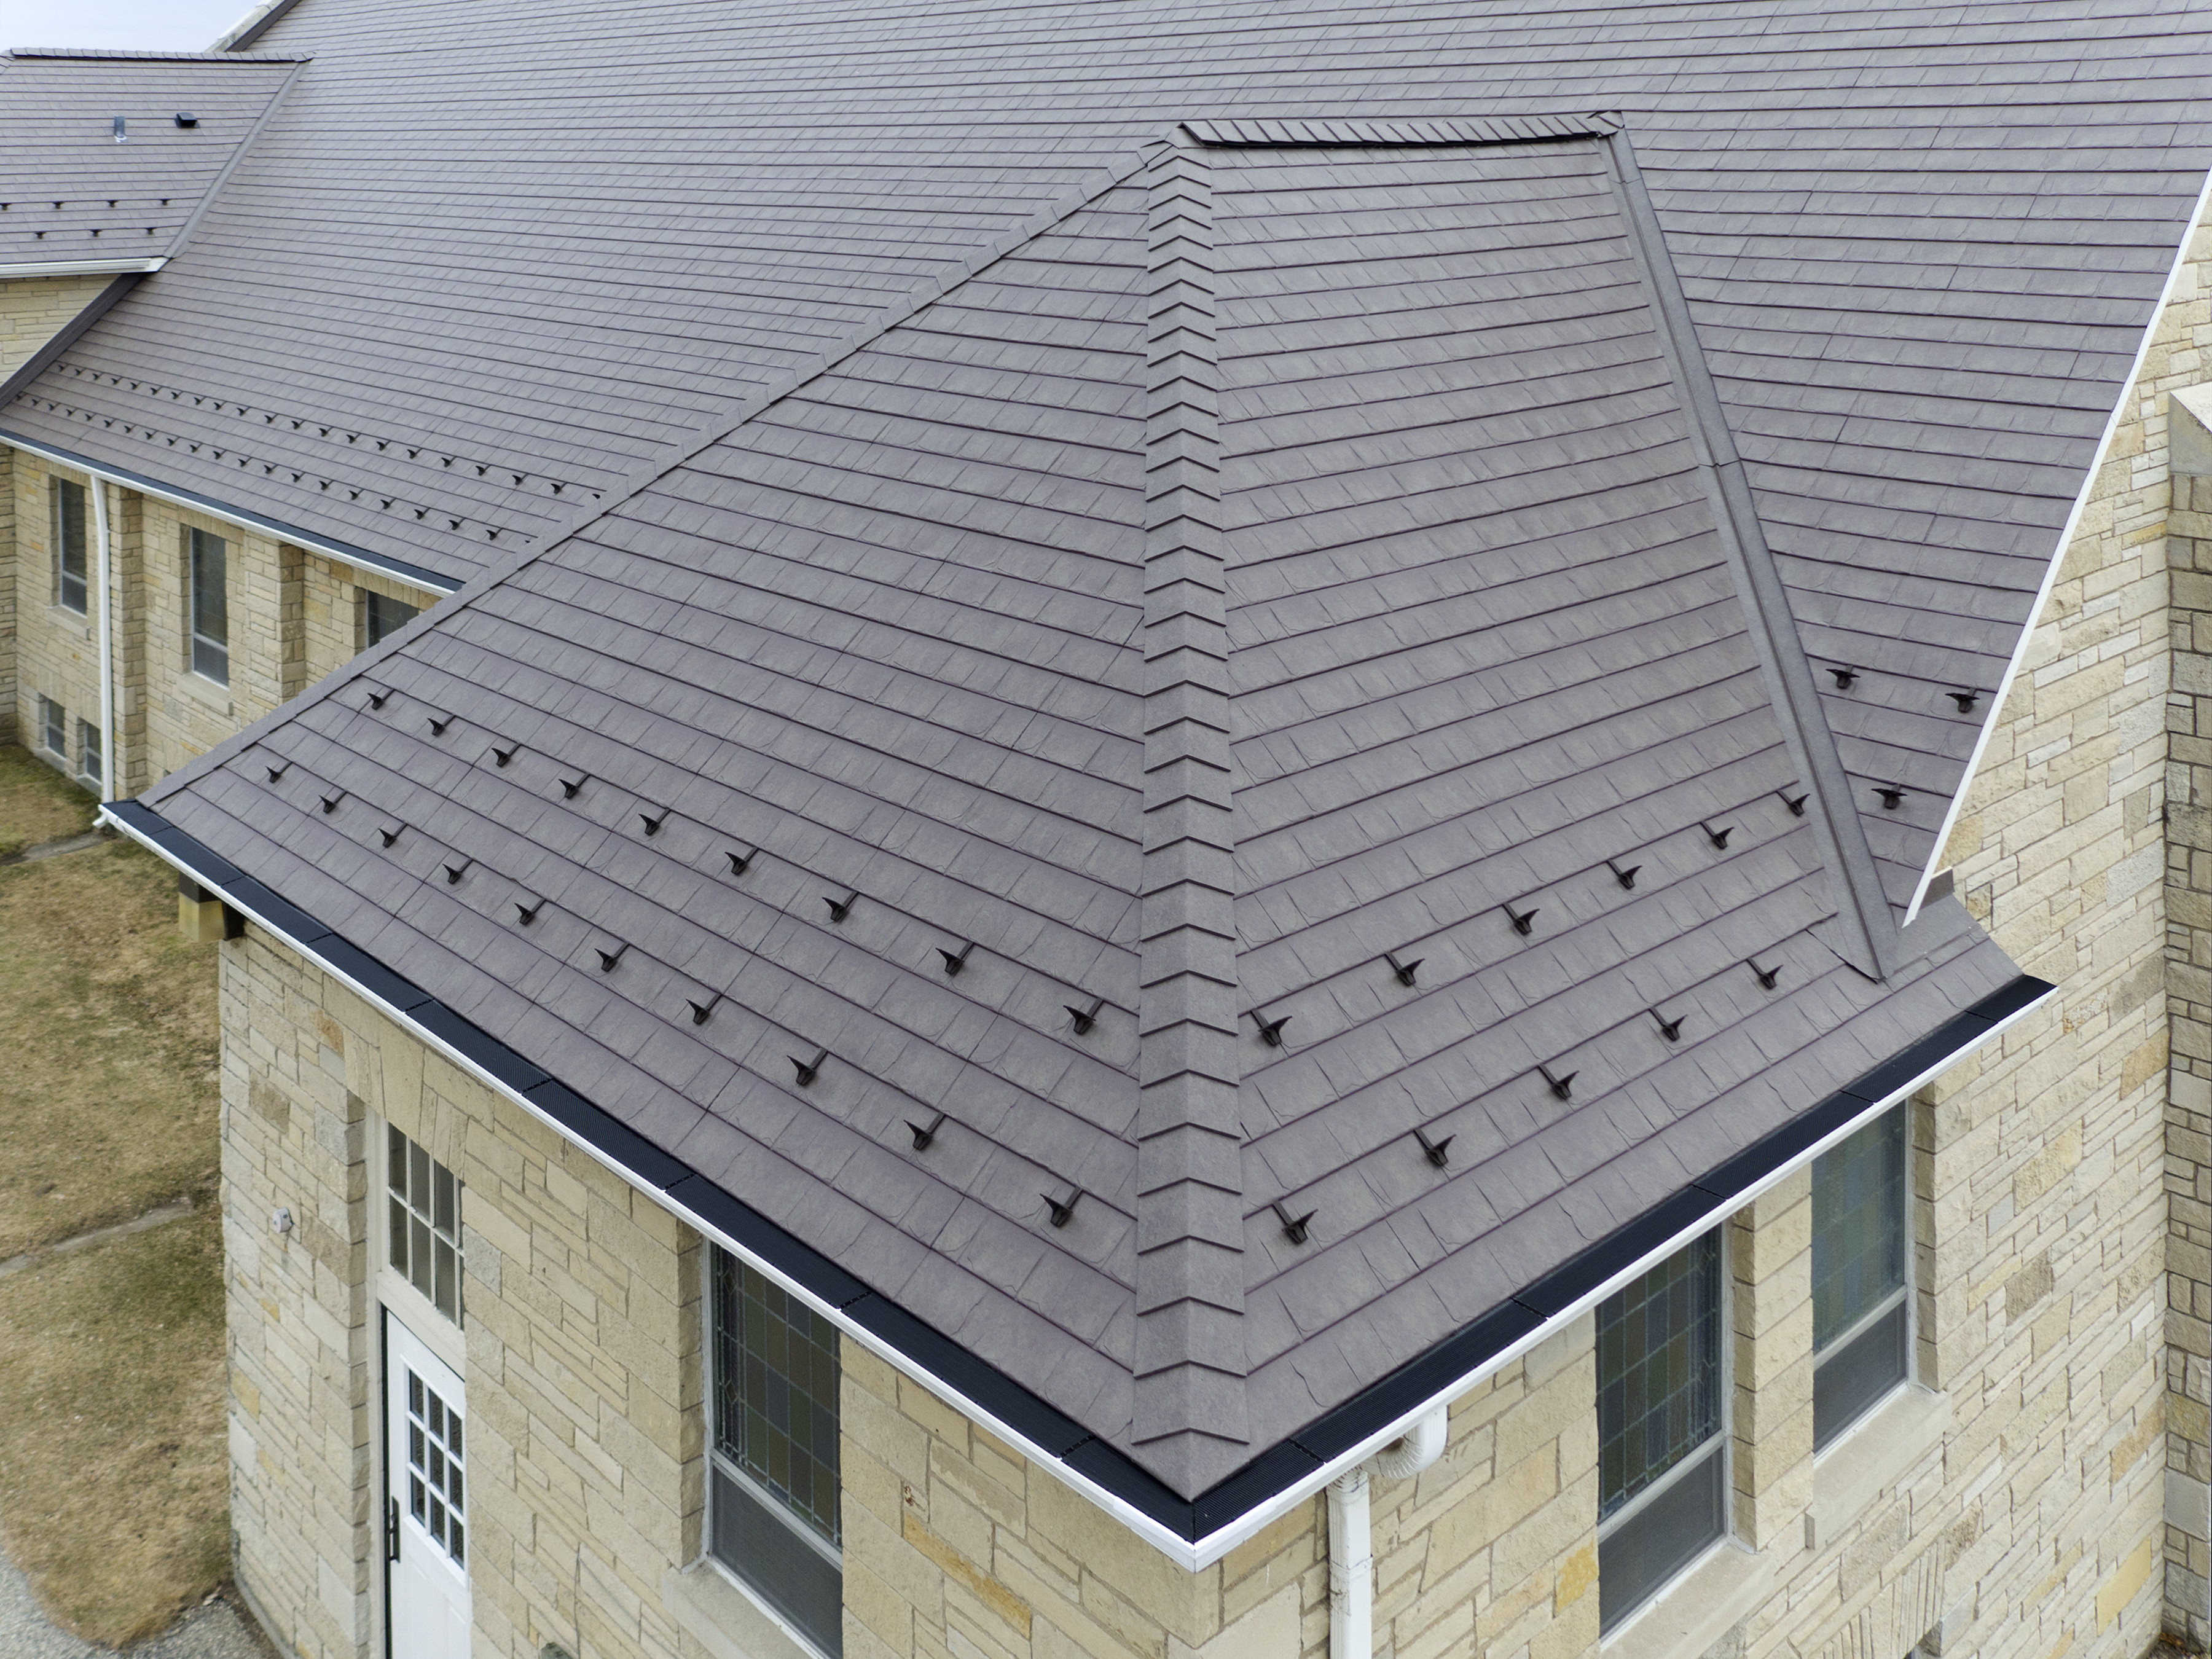 Simulated shingle roofing made from deepdraw steel provides performance advantages such as wind resistance and high solar reflectance. Photo courtesy CertainTeed